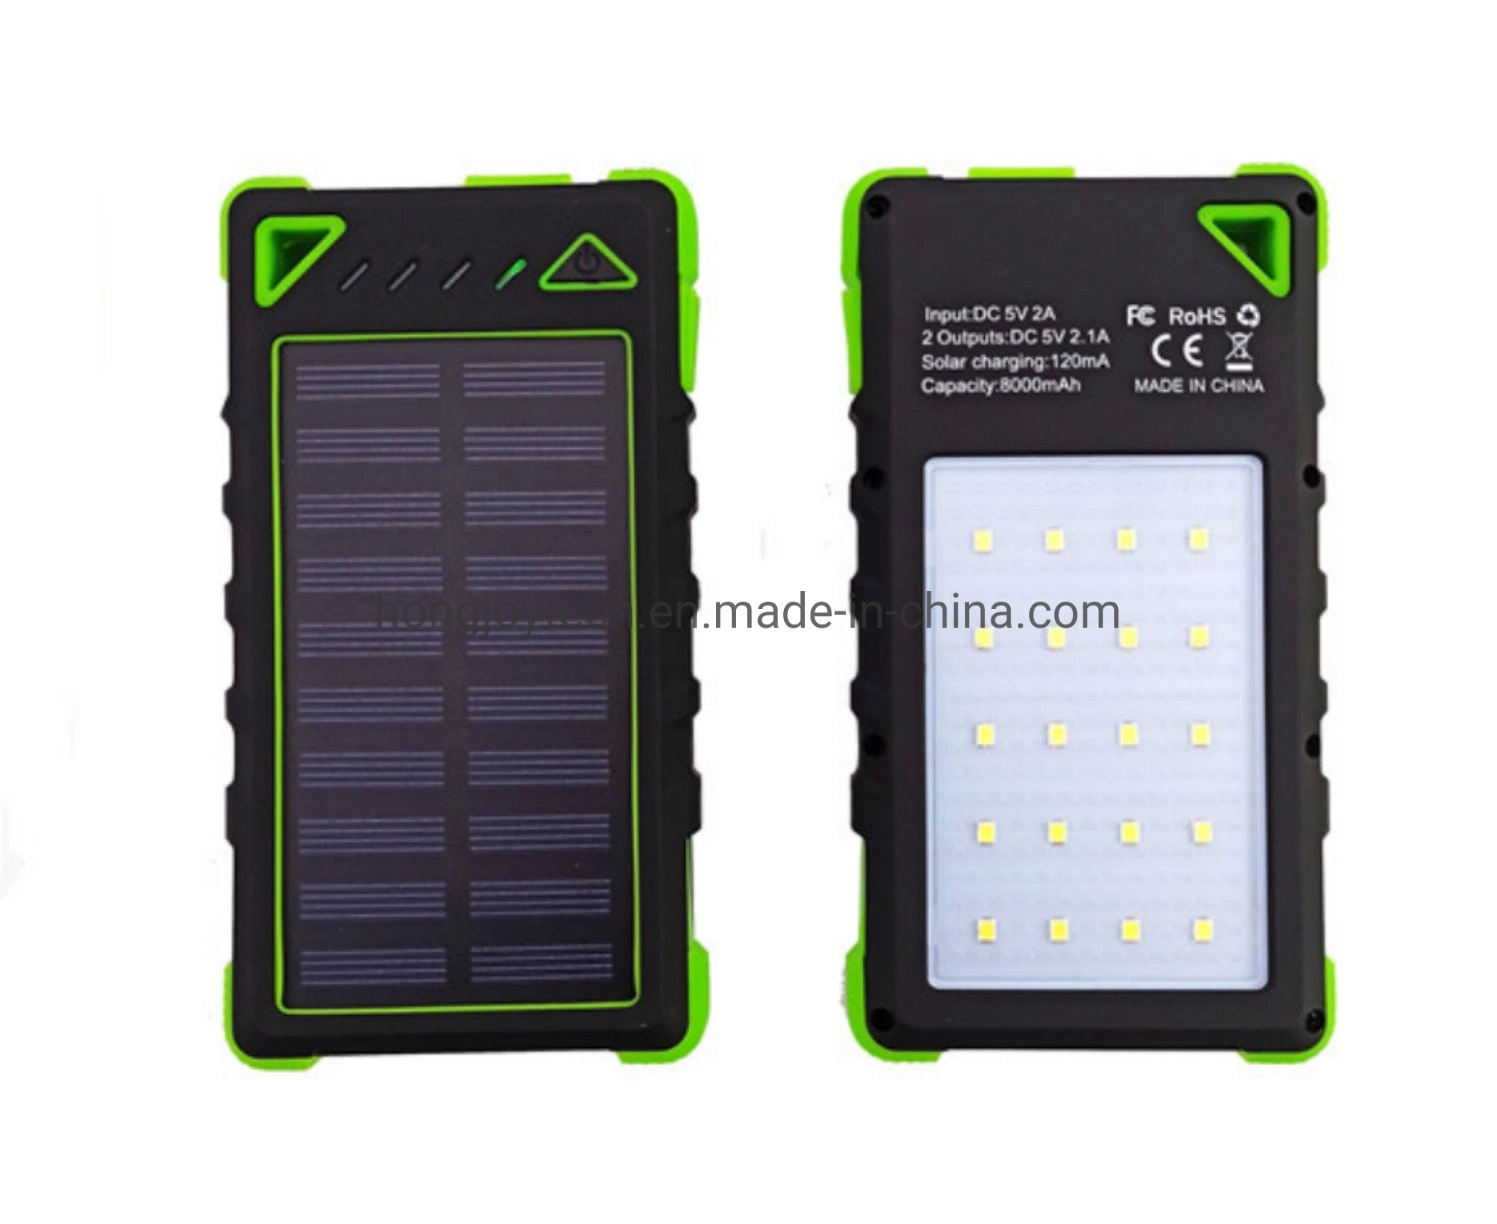 LED Torches & Sos Portable Battery Charger, 6000mAh 10000mAh External Emergency Phone Charger, Orange Green Yellow Black Color Solar Panel Power Bank Charger